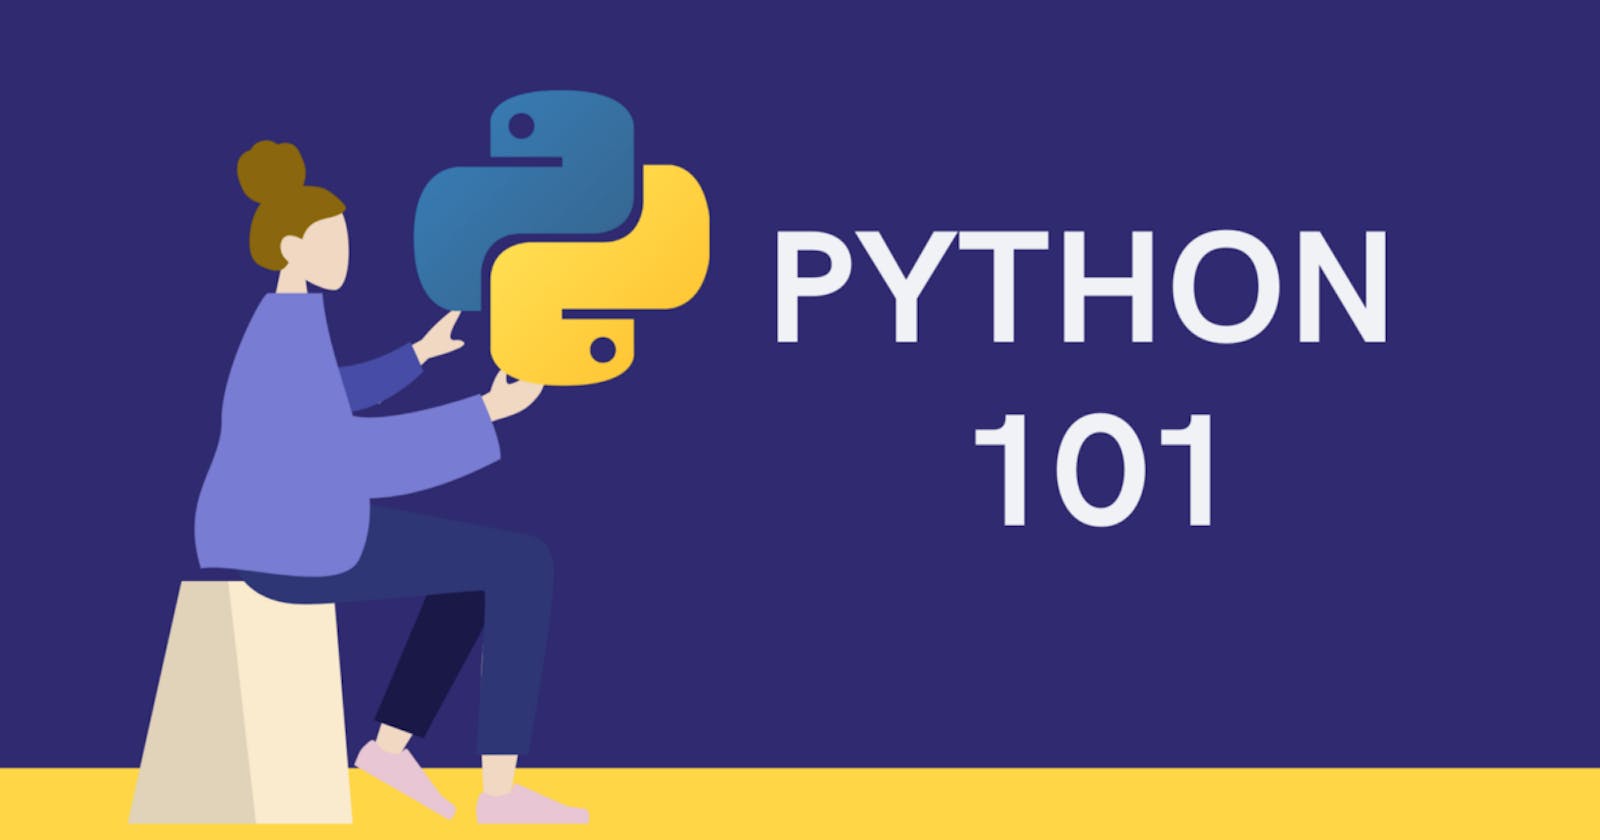 Introduction to Python 101